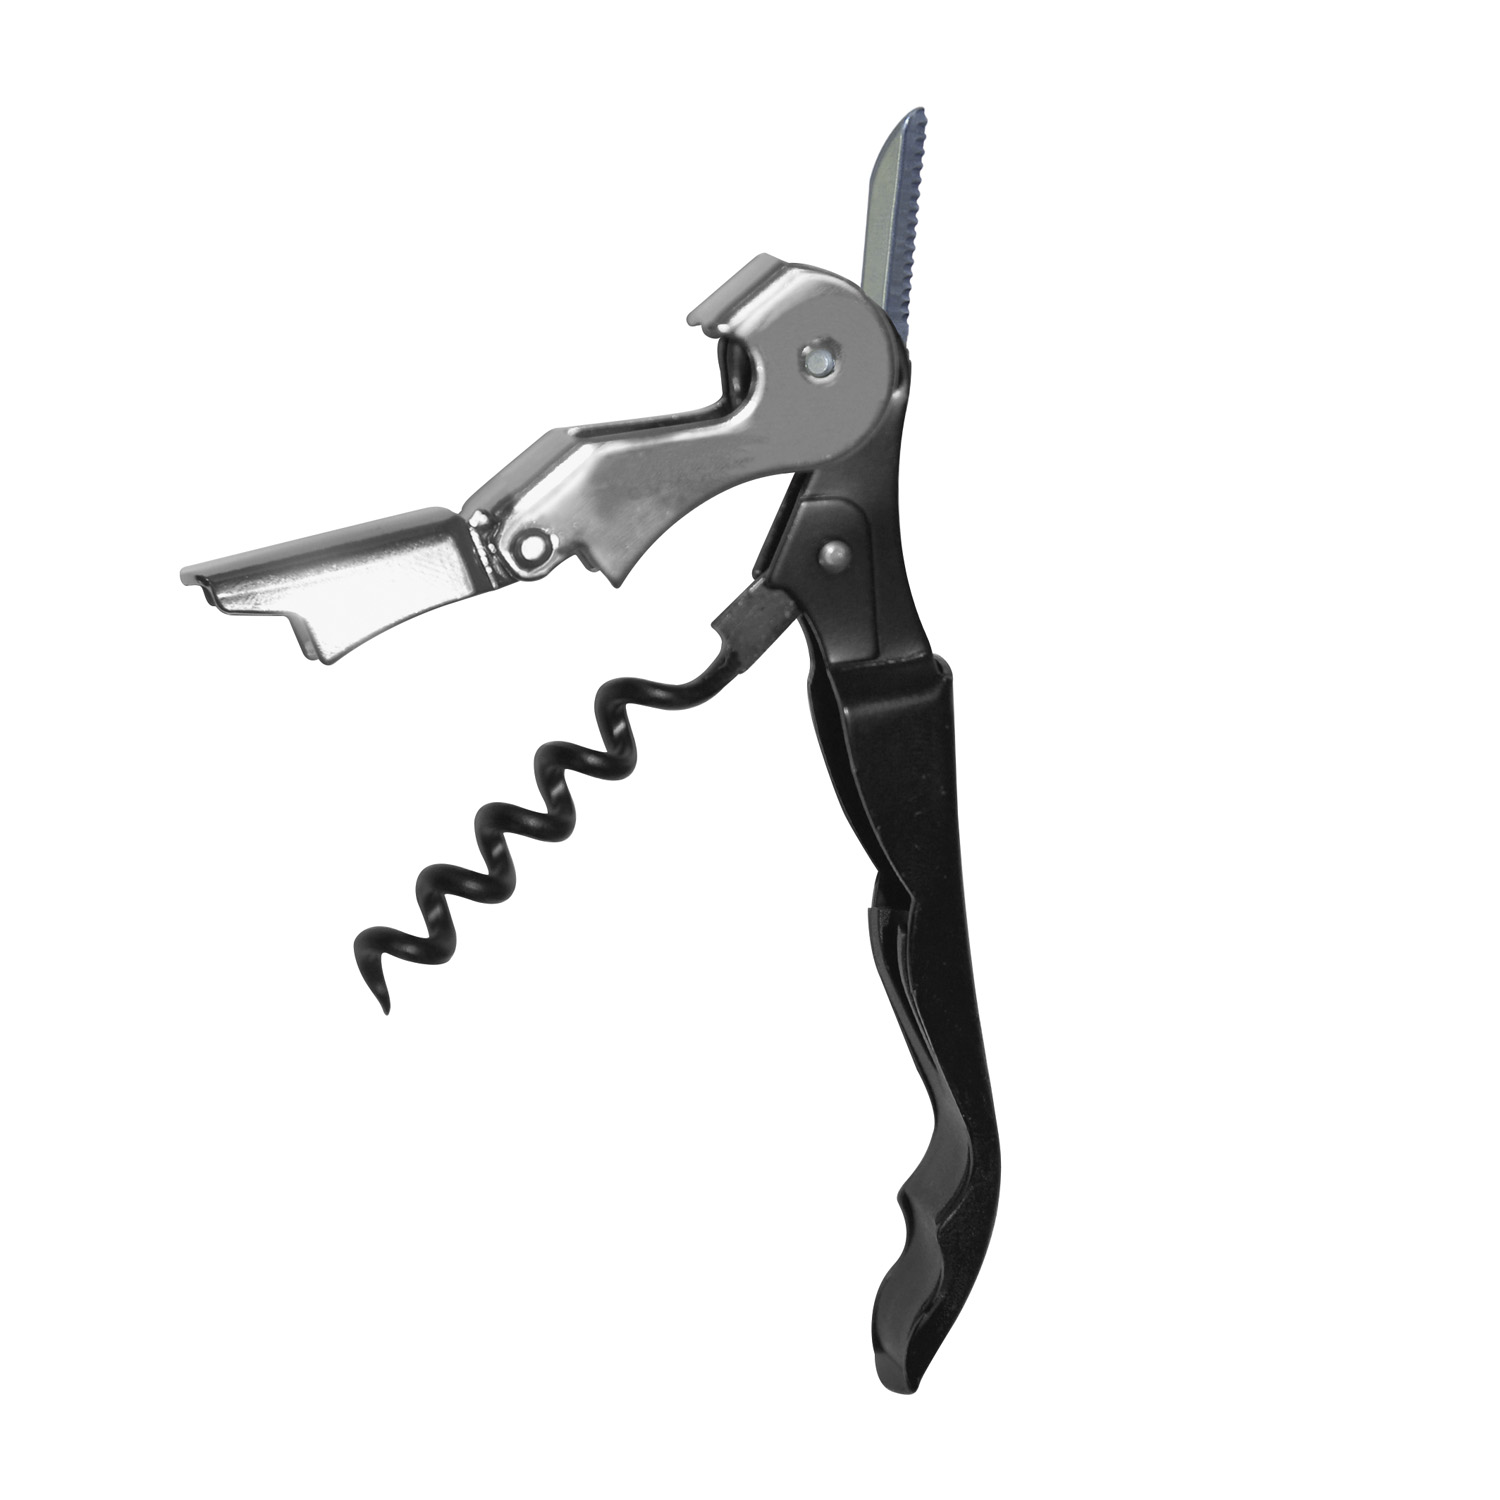 CAC China CKSW-1 Waiter's Corkscrew with Hinged Double Lever